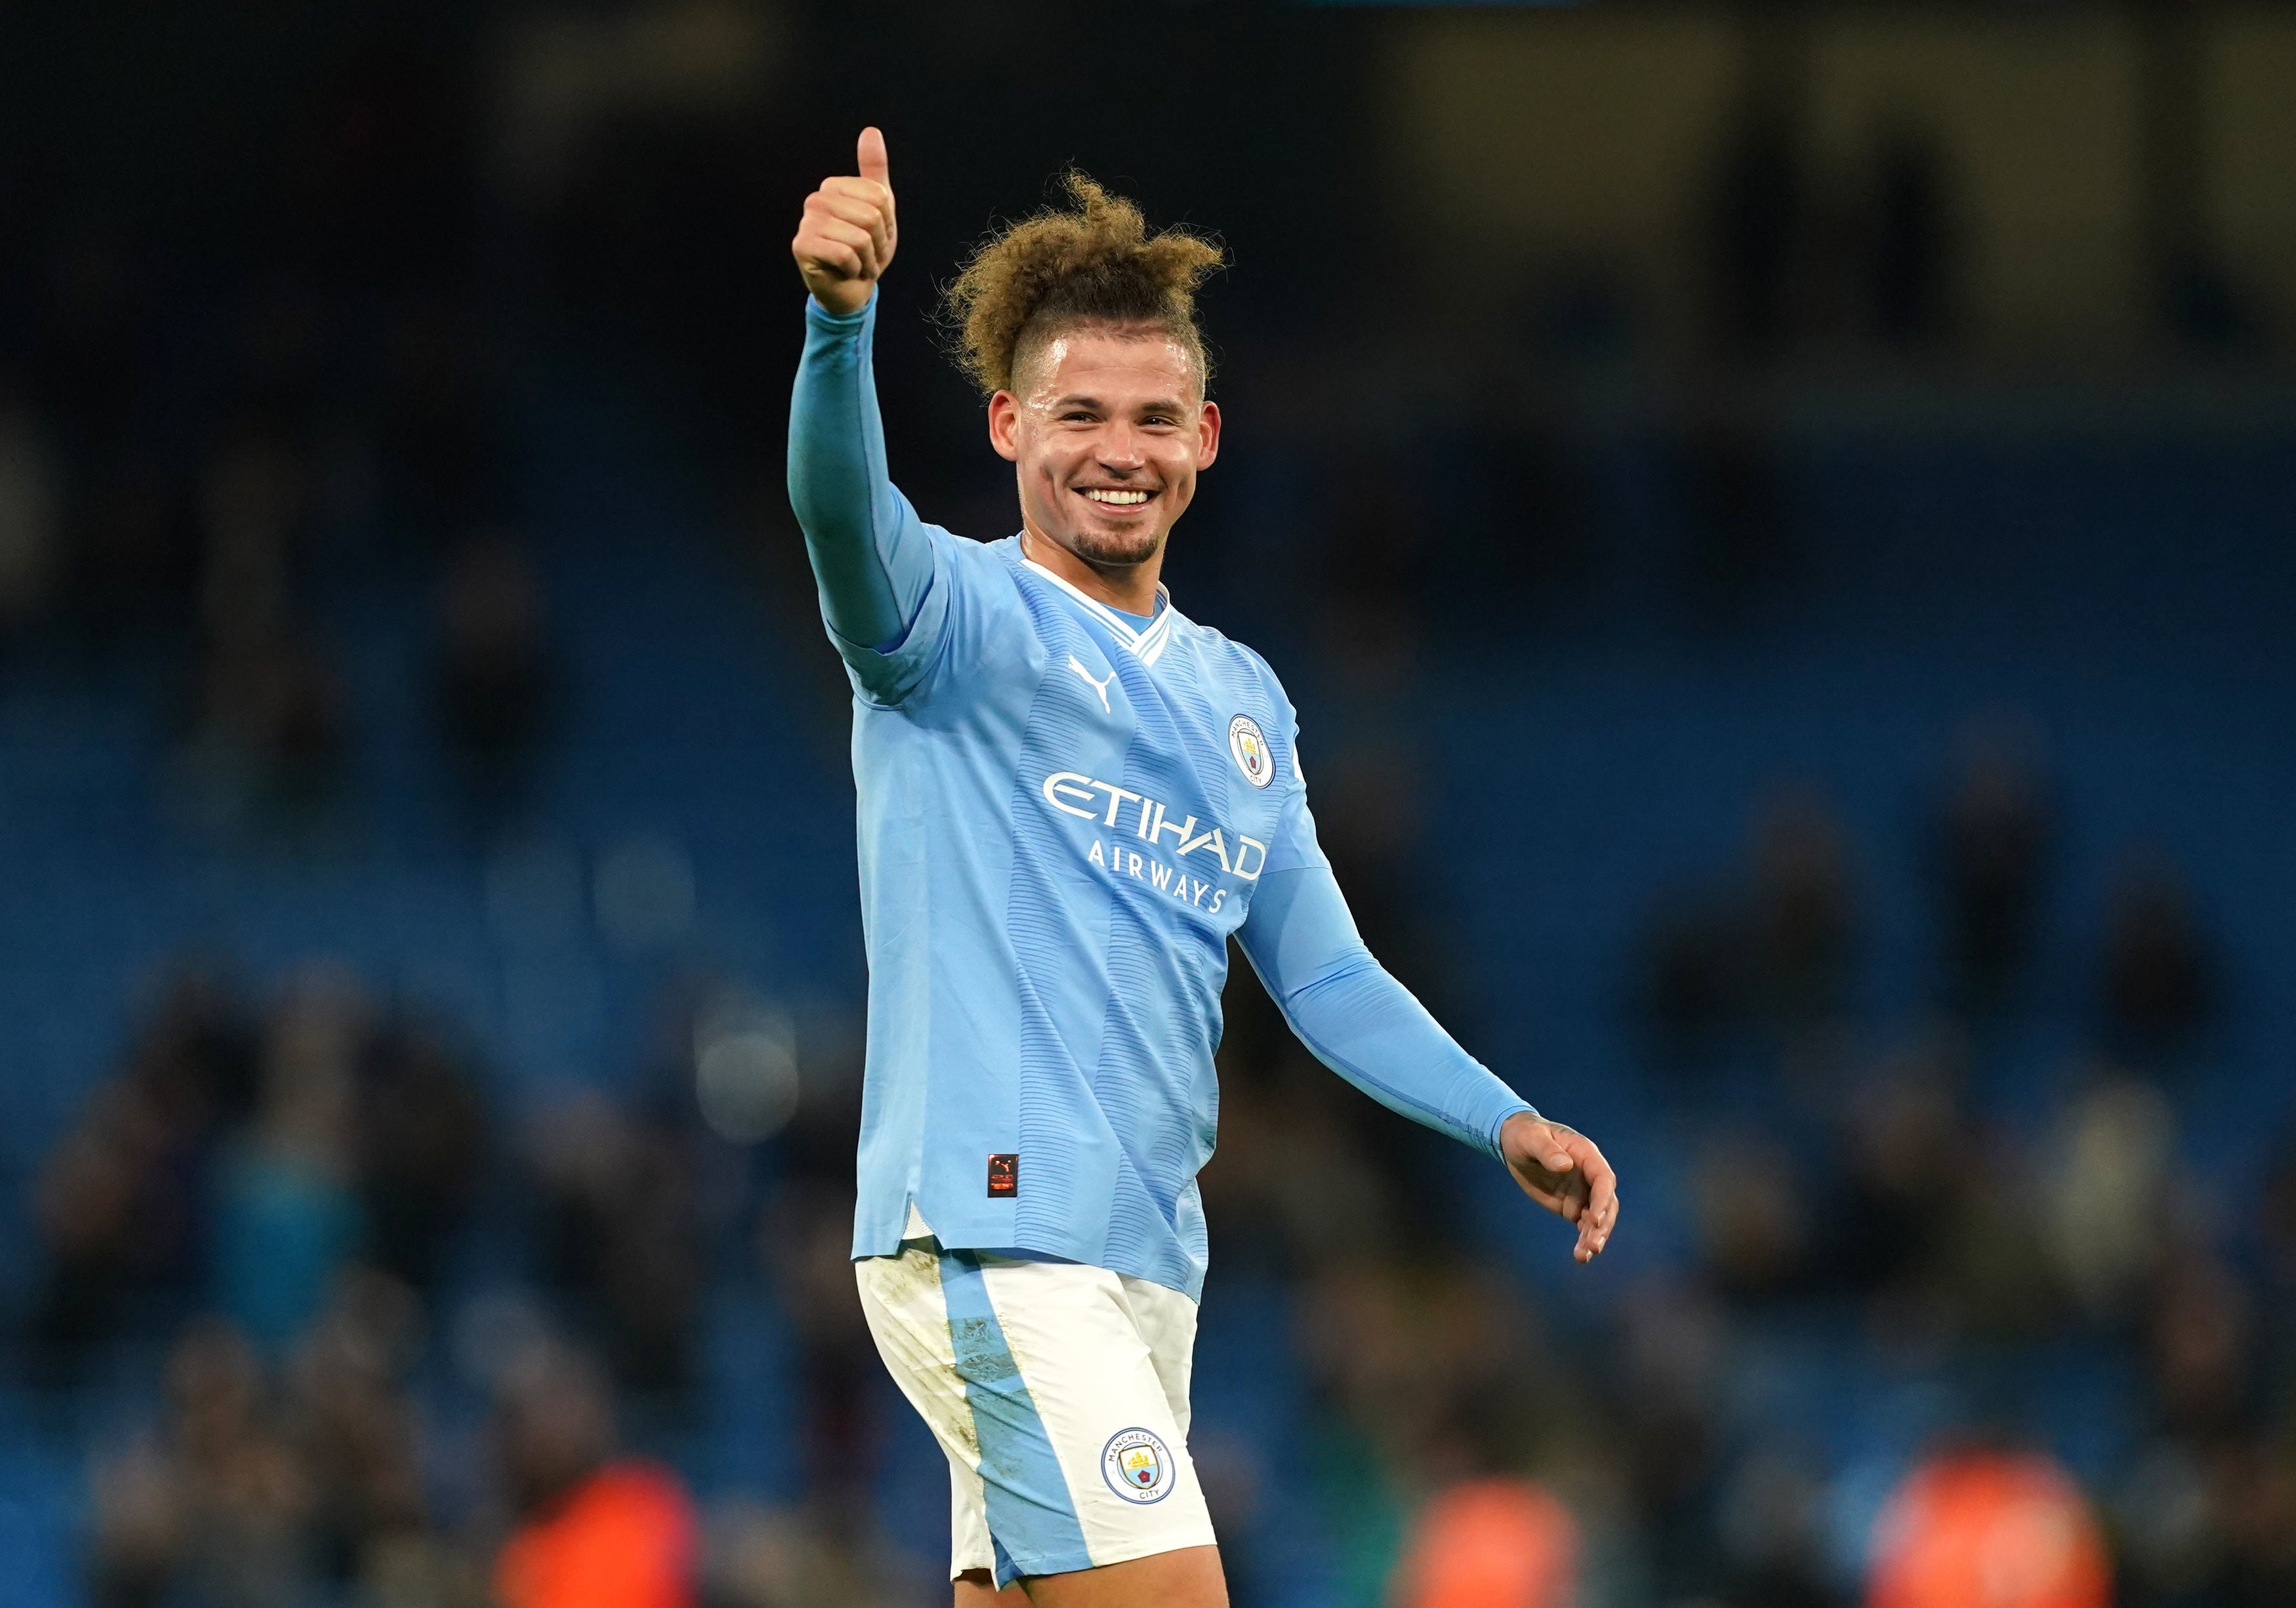 Kalvin Phillips joins West Ham on loan from Man City